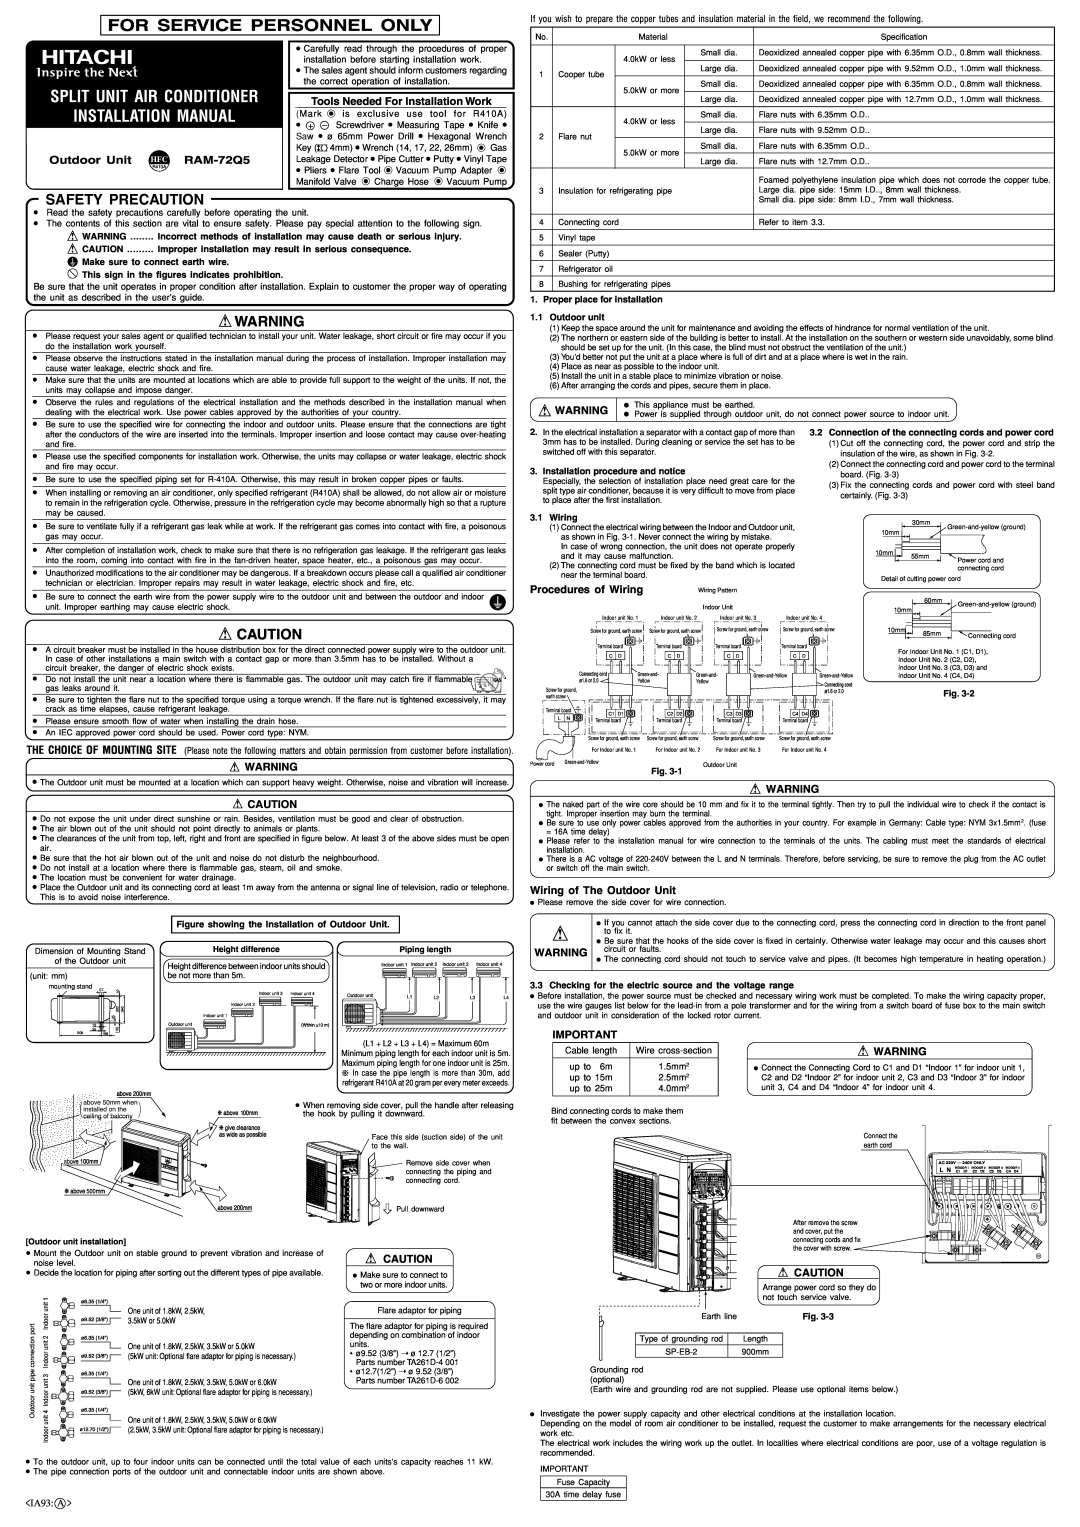 Hitachi RAM-72Q5 installation manual IA93 A, For Service Personnel Only, Split Unit Air Conditioner Installation Manual 